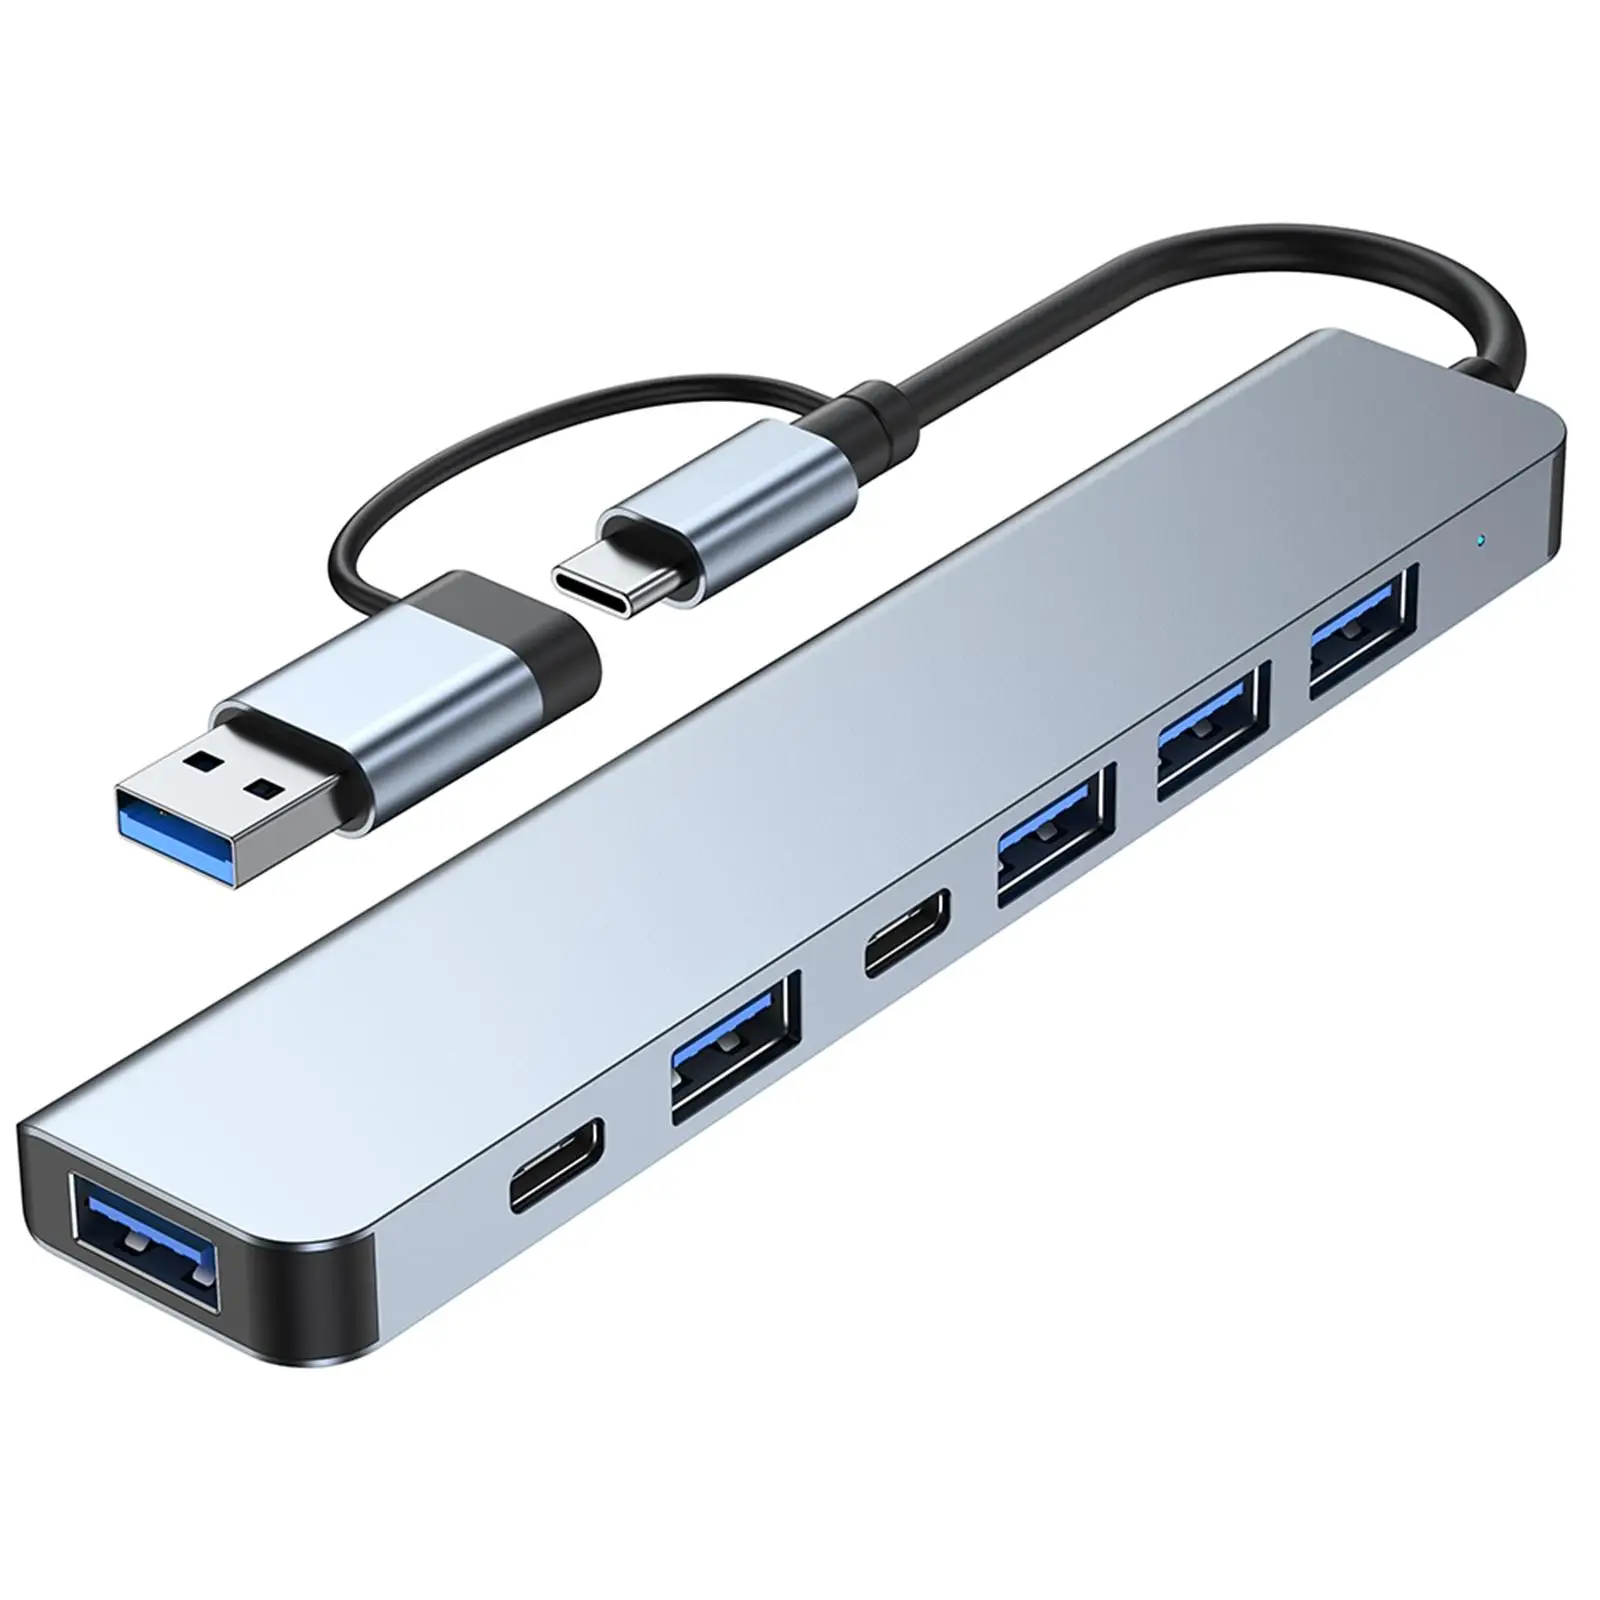 Portable USB Type C Hub Plug and Play Compact 5Gbps Transfer Rate Docking Station for Phs